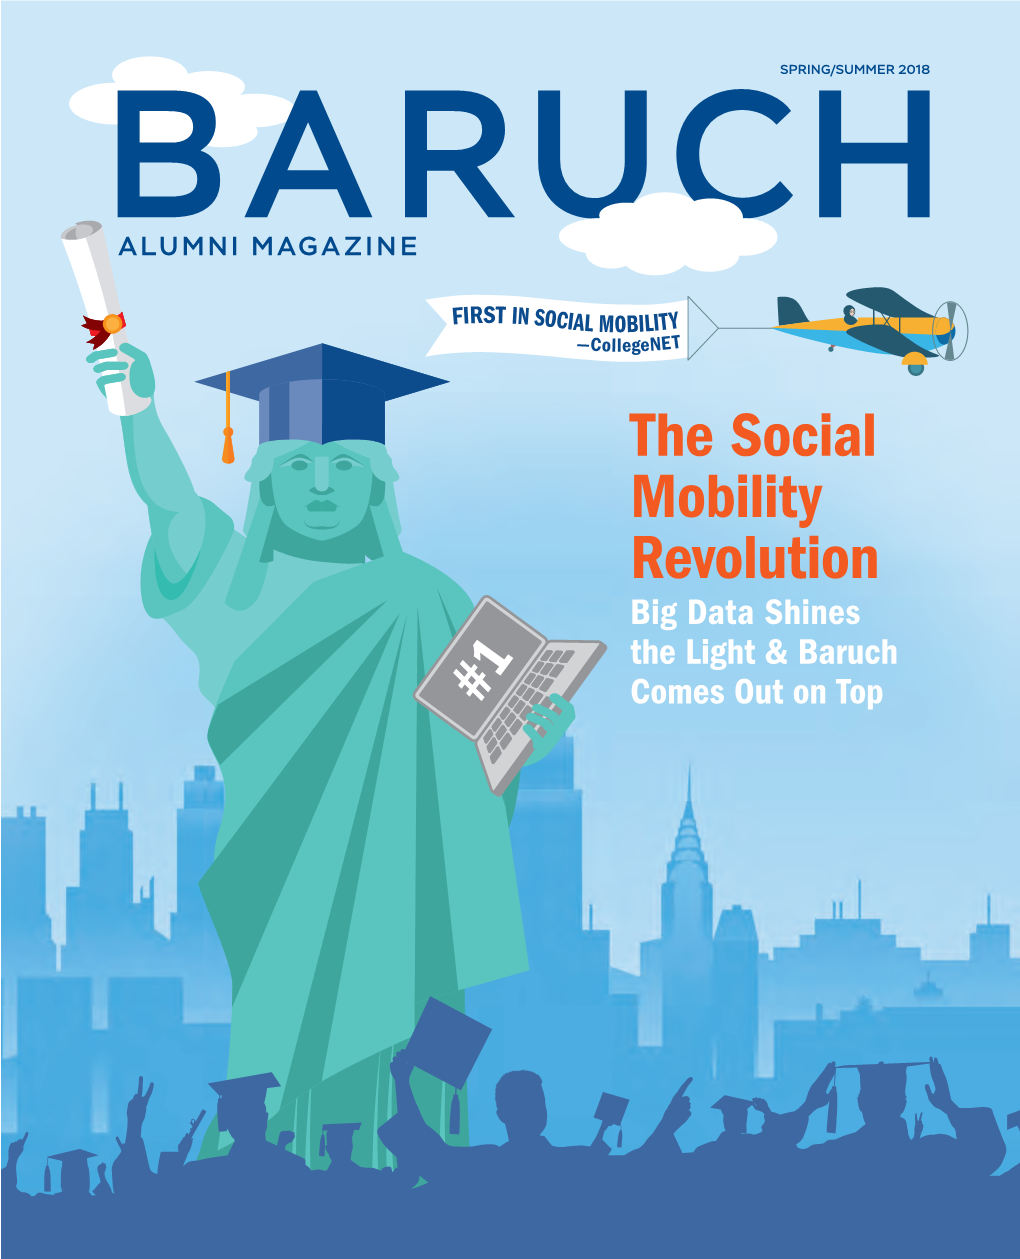 The Social Mobility Revolution Big Data Shines the Light & Baruch Comes out on Top